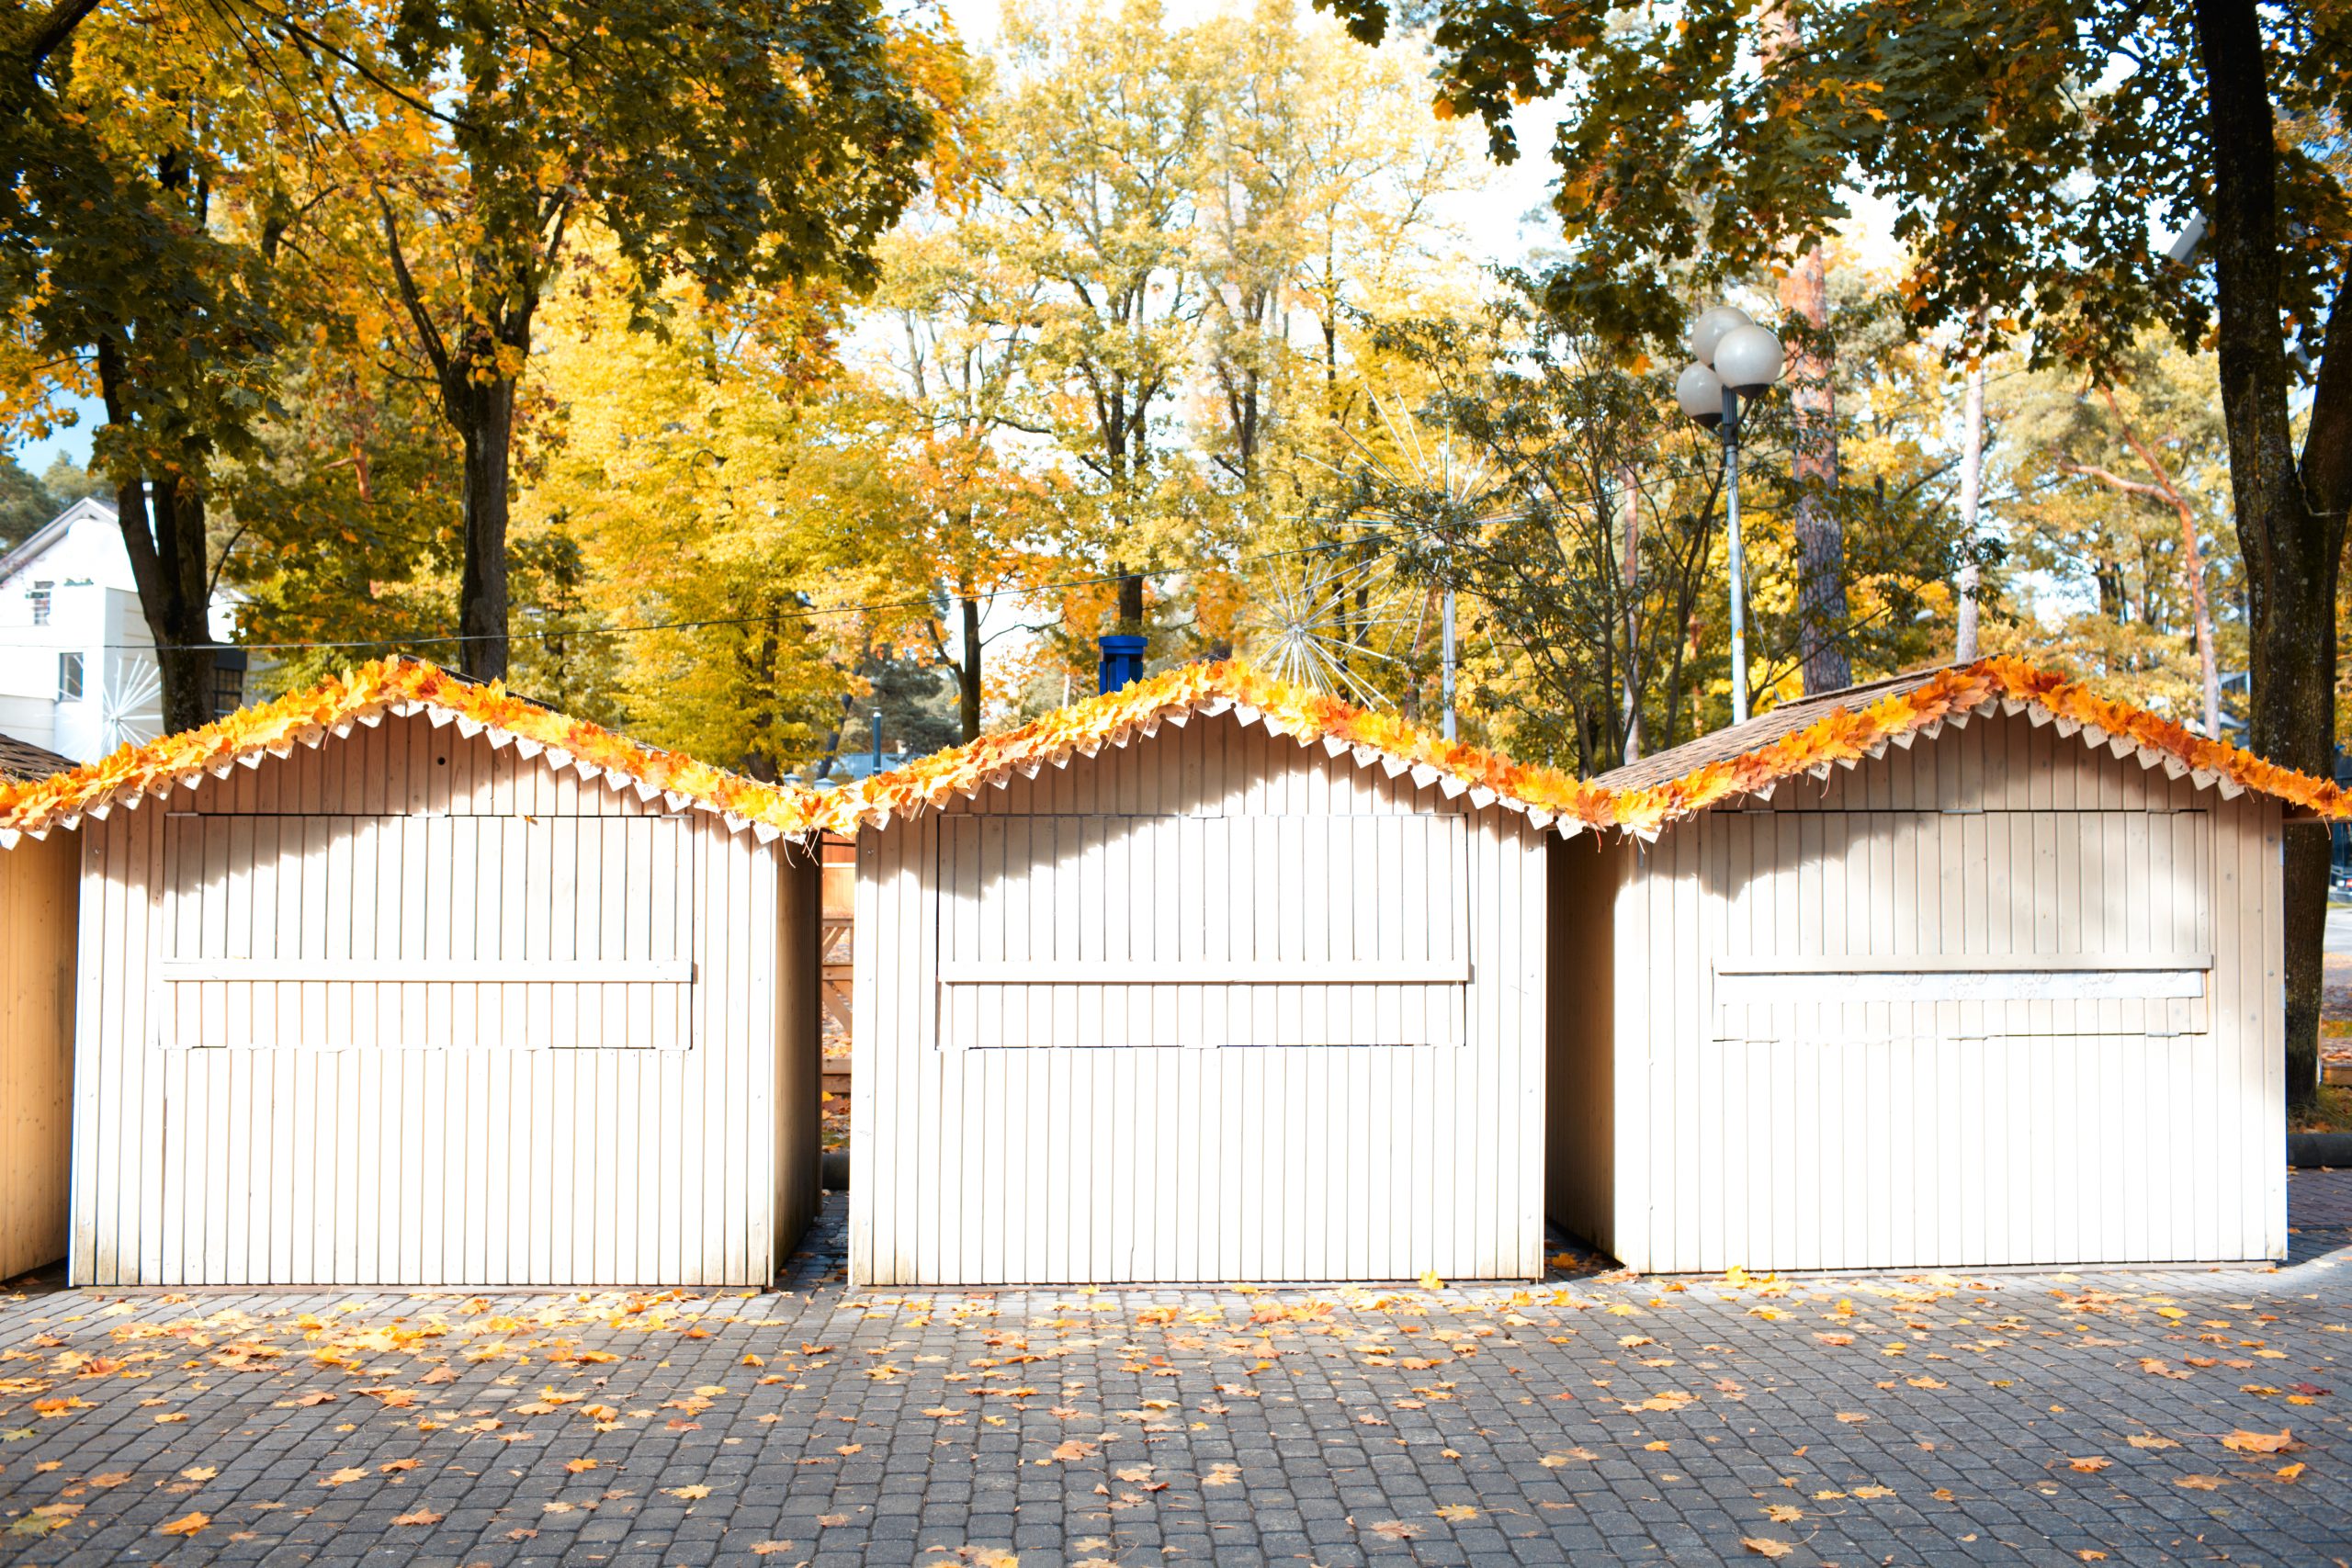 Autumn landscape - three small wooden houses and yellow leaves in Jurmala, Latvia.